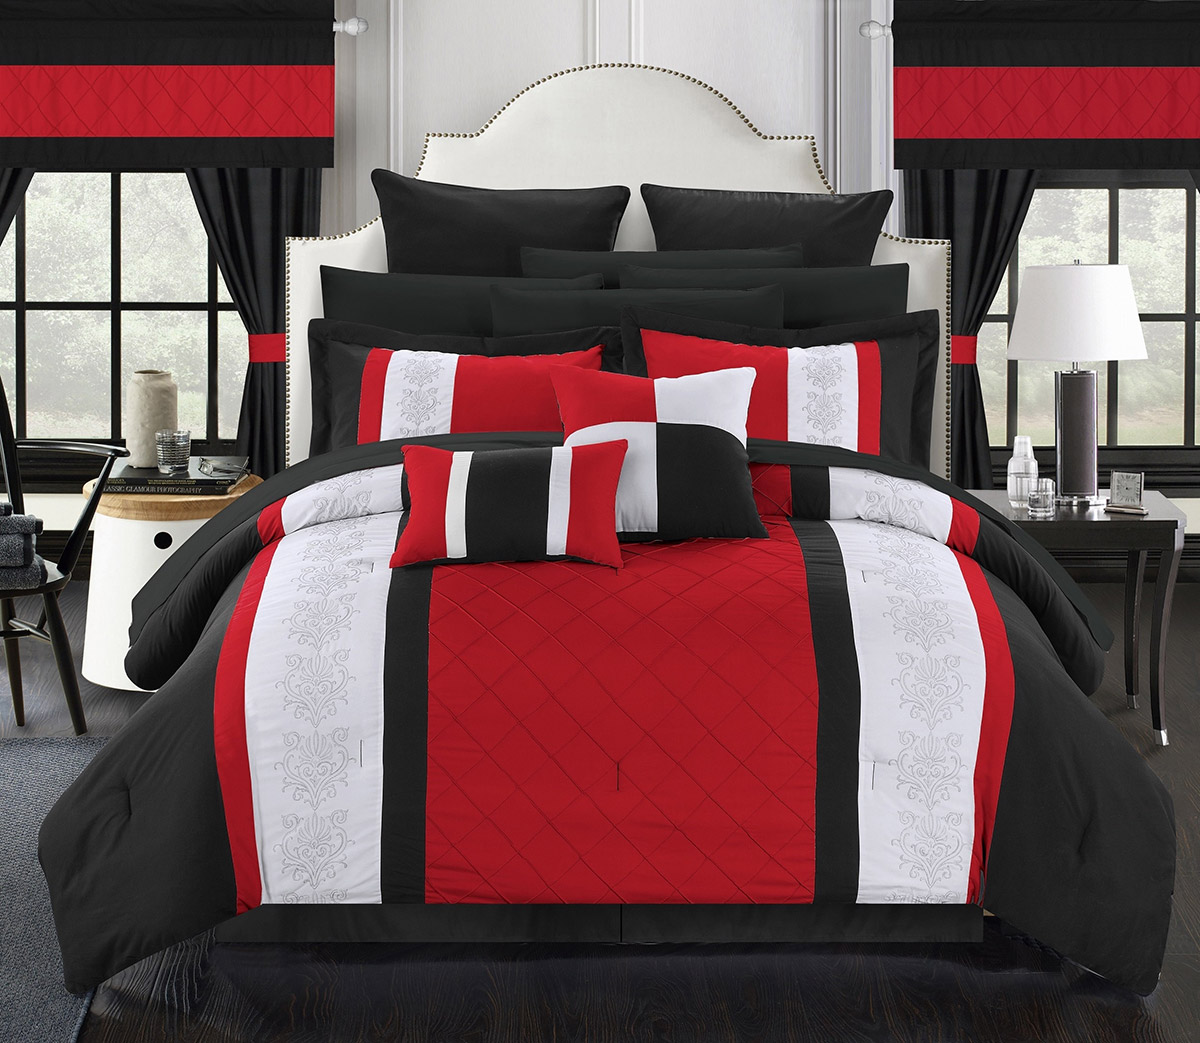 red-and-black-bedroom-600x522.jpg